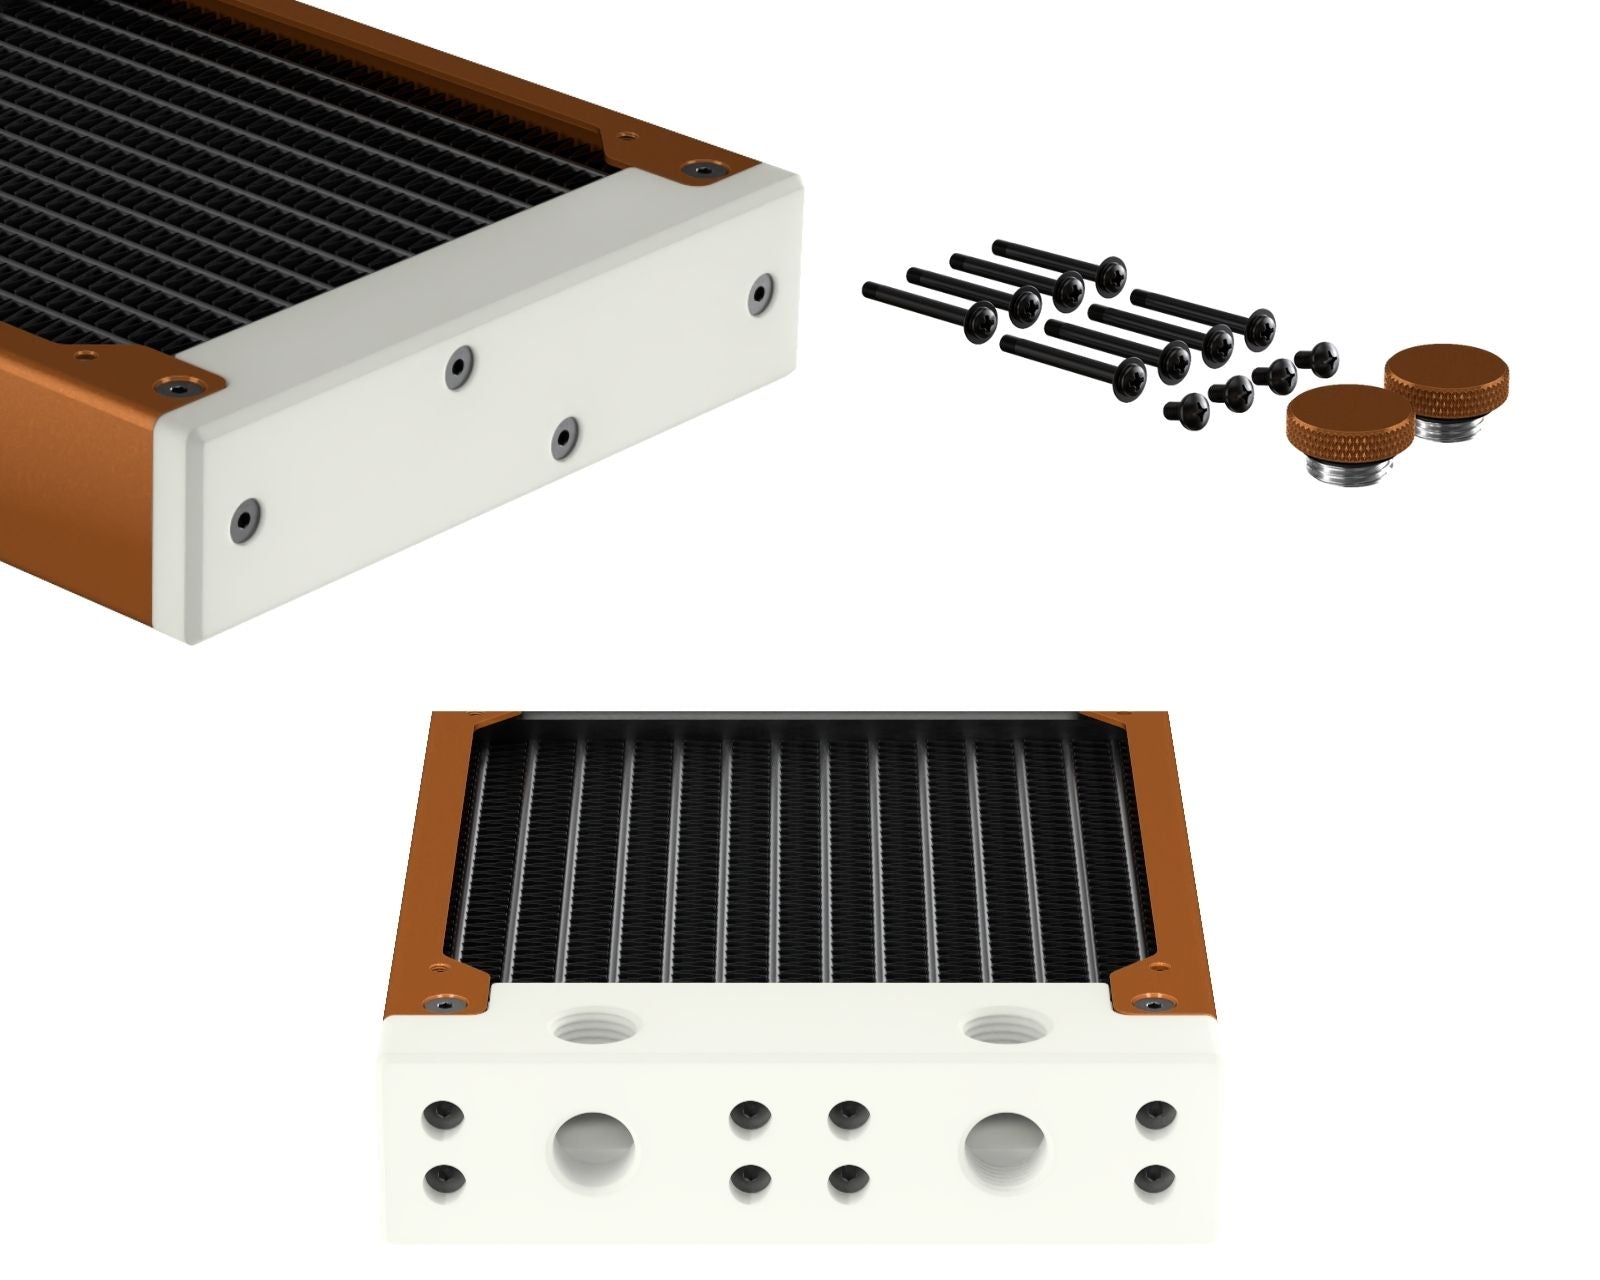 PrimoChill 240SL (30mm) EXIMO Modular Radiator, White POM, 2x120mm, Dual Fan (R-SL-W24) Available in 20+ Colors, Assembled in USA and Custom Watercooling Loop Ready - Copper